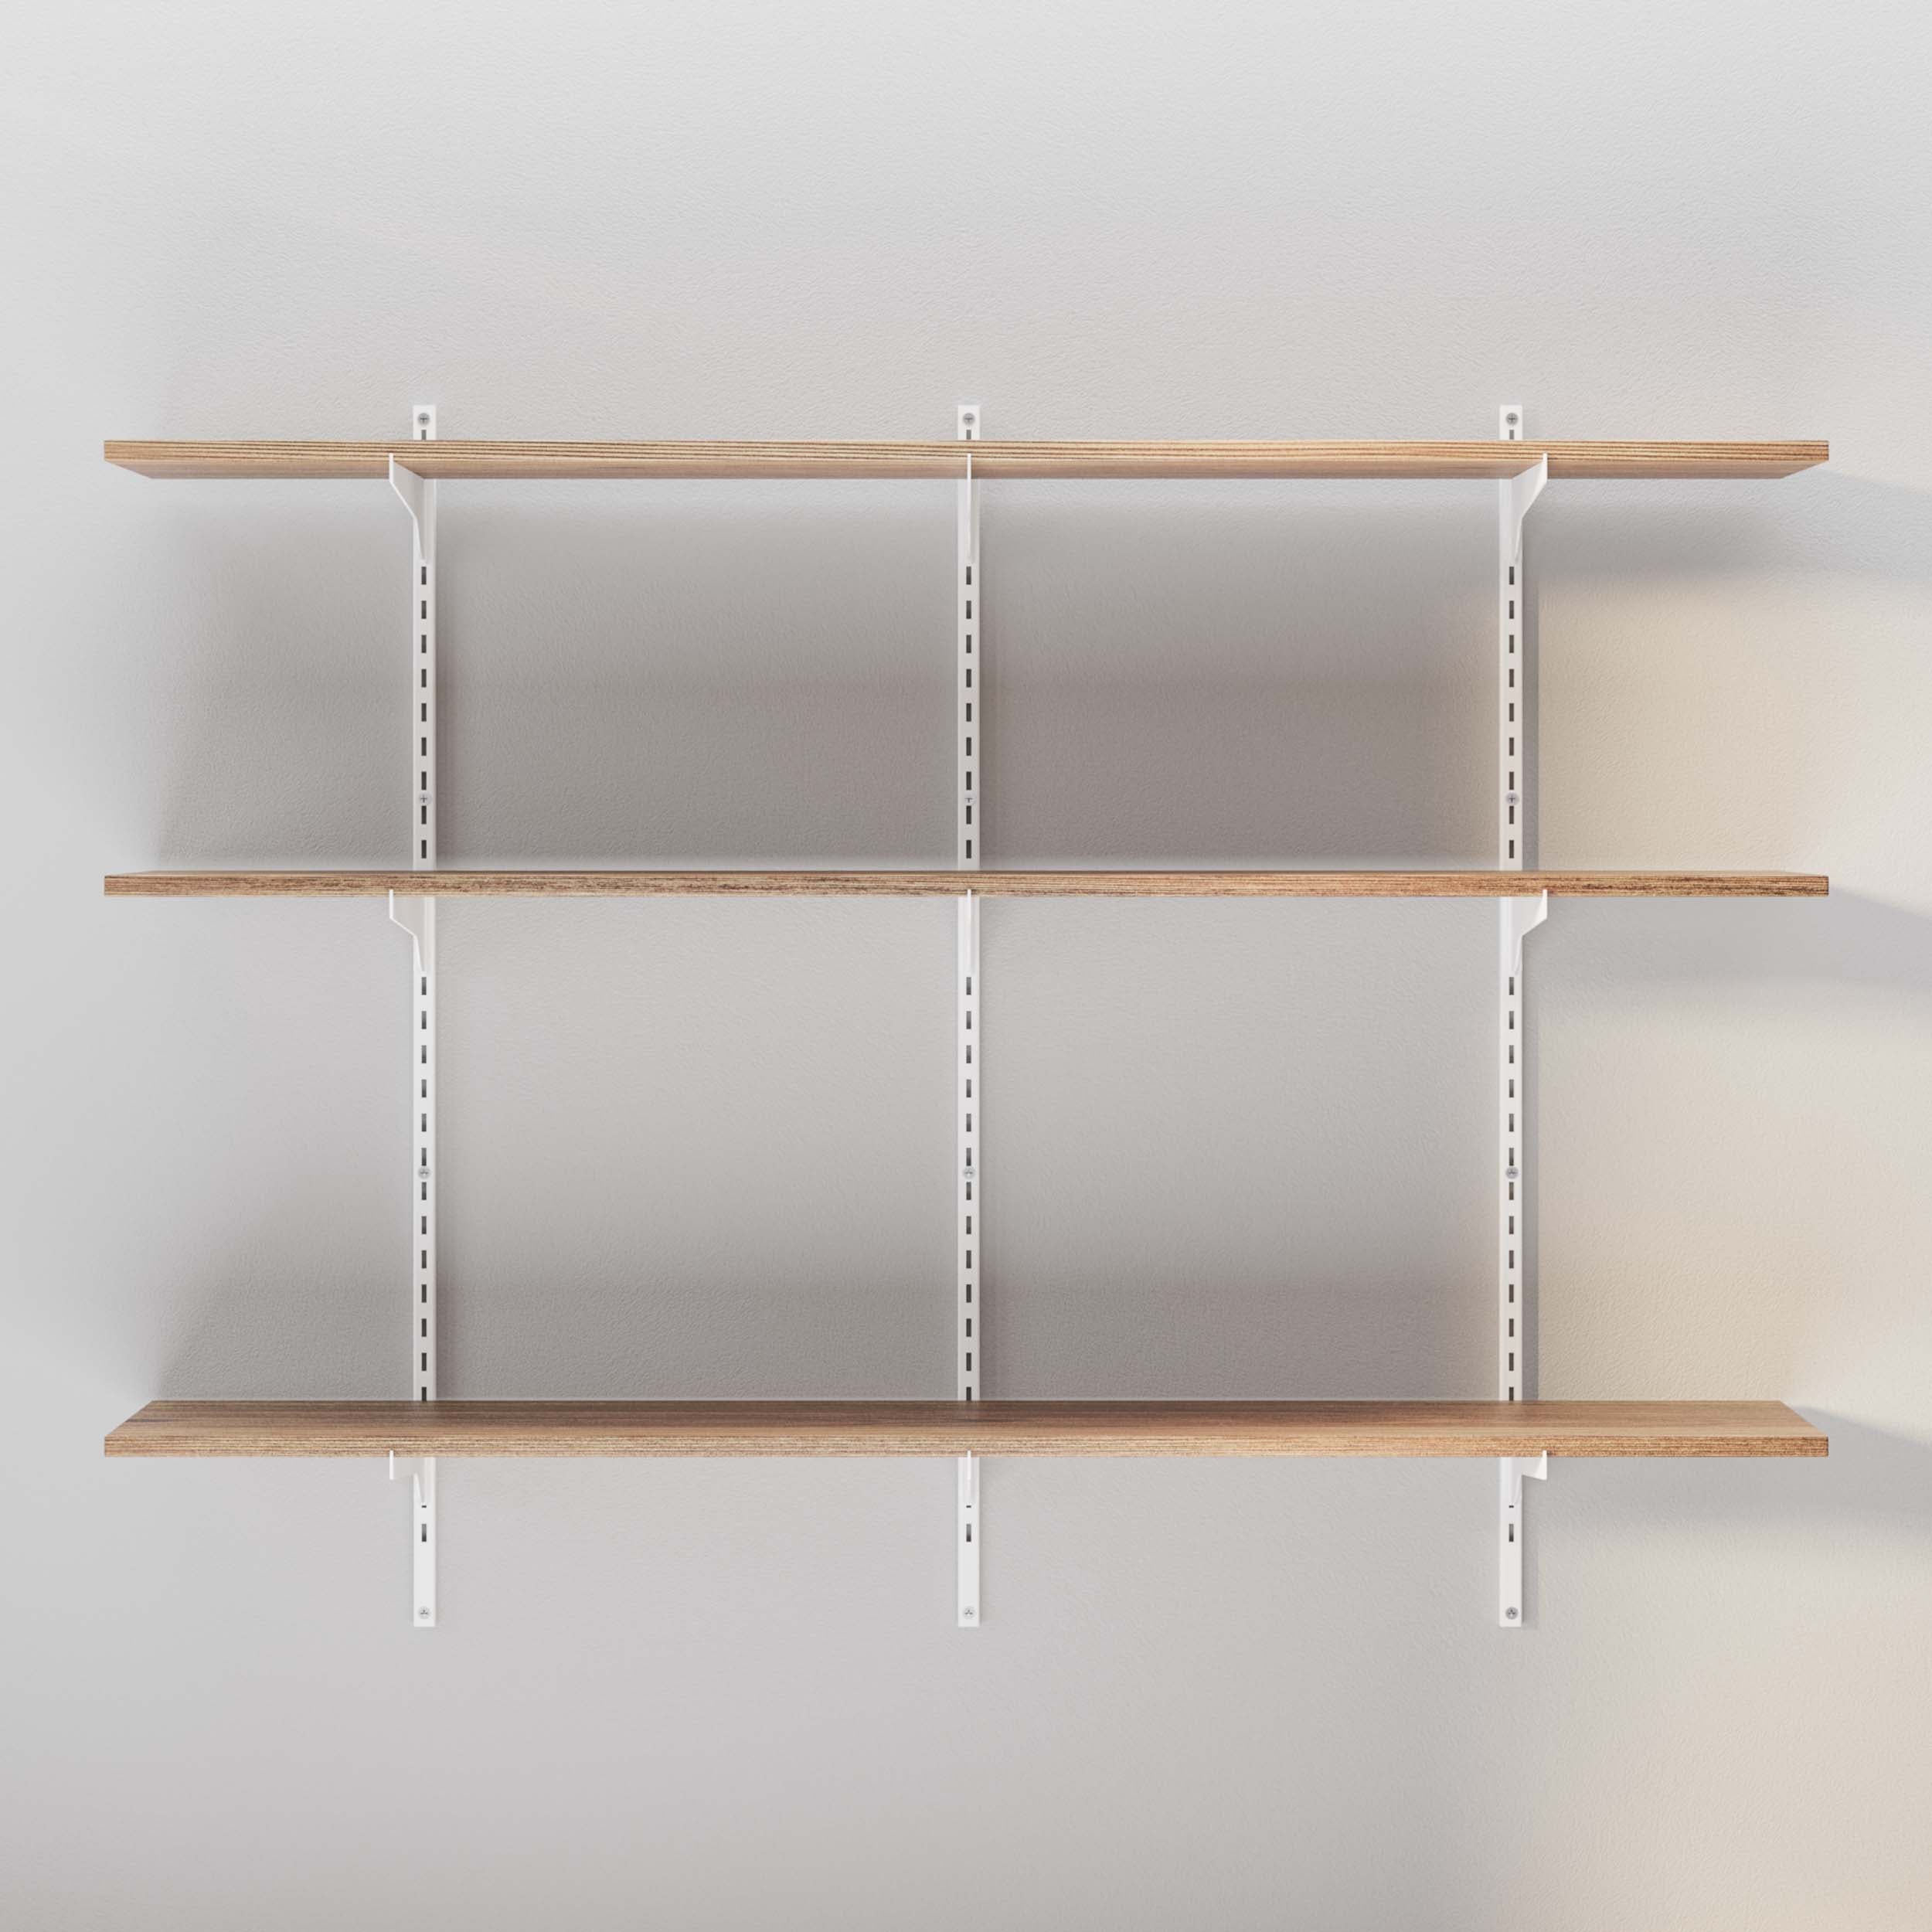 Empty wood shelf with white vertical supports, awaiting personal items for display.